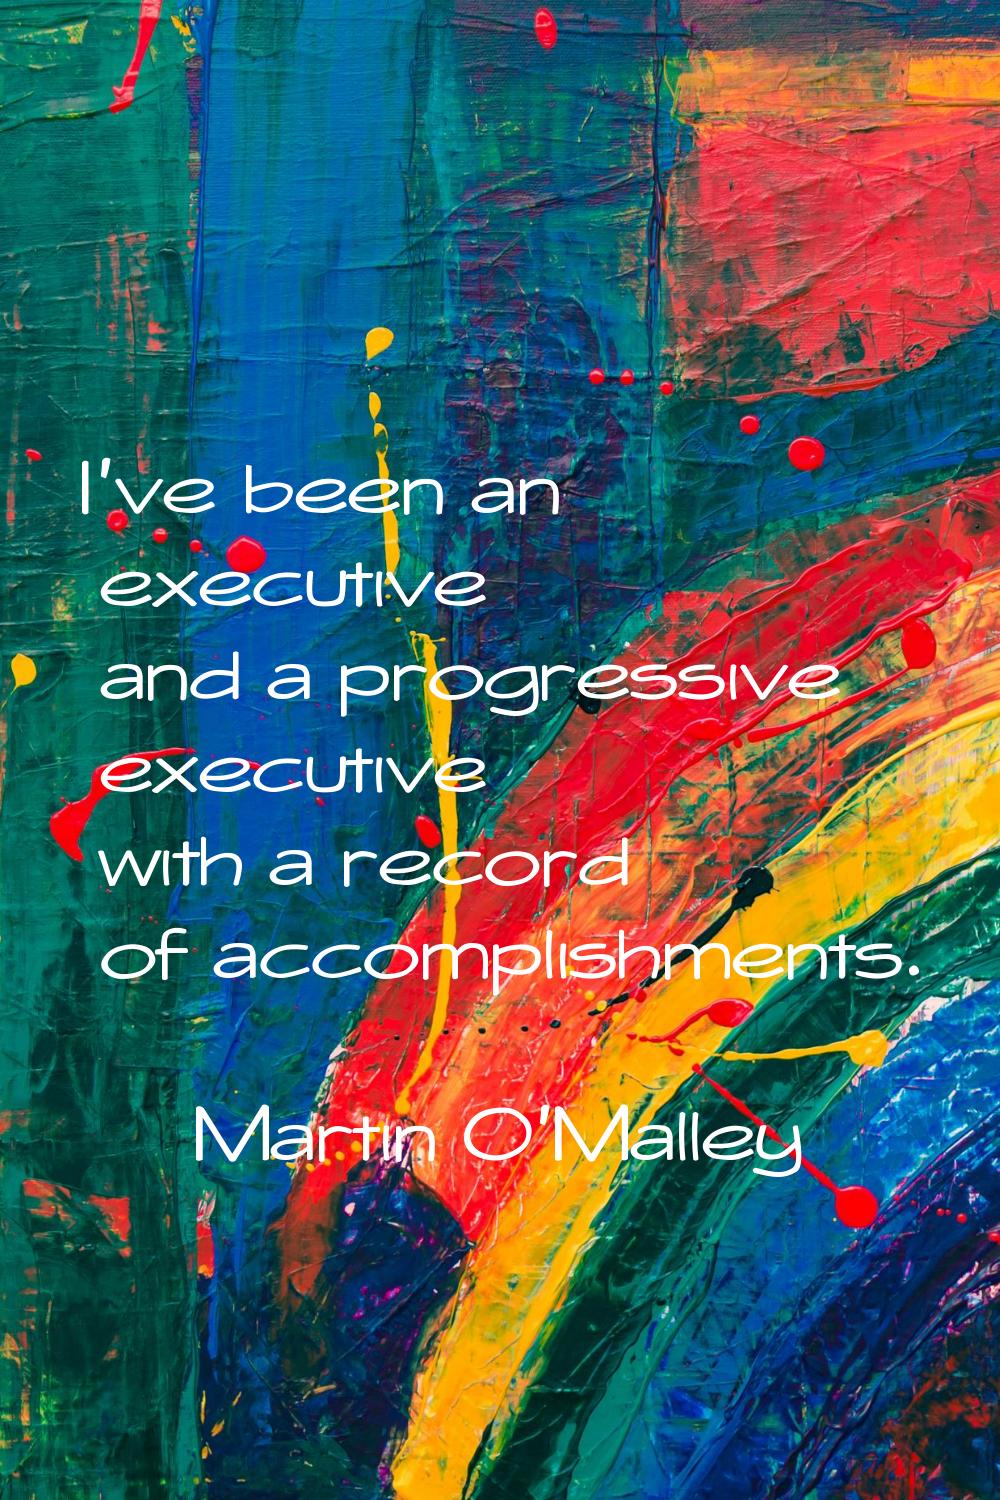 I've been an executive and a progressive executive with a record of accomplishments.